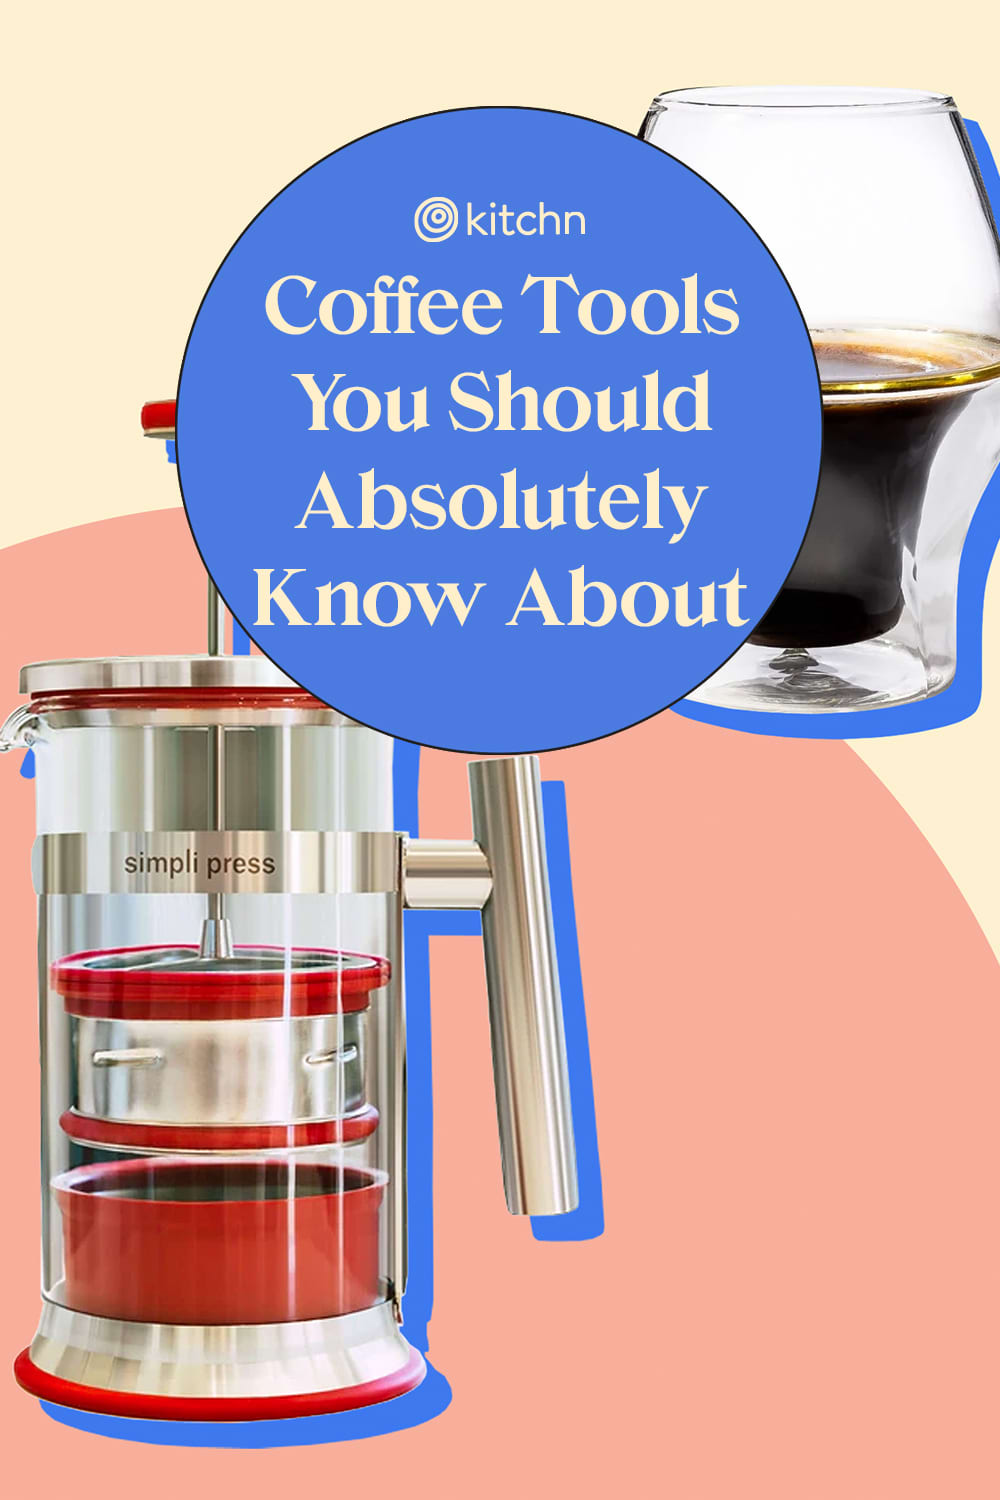 https://cdn.apartmenttherapy.info/image/upload/v1629381604/k/Photo/Recipes/2021-Custom-Pins/coffeetoolsyoushouldabsolutelyknowabout.jpg